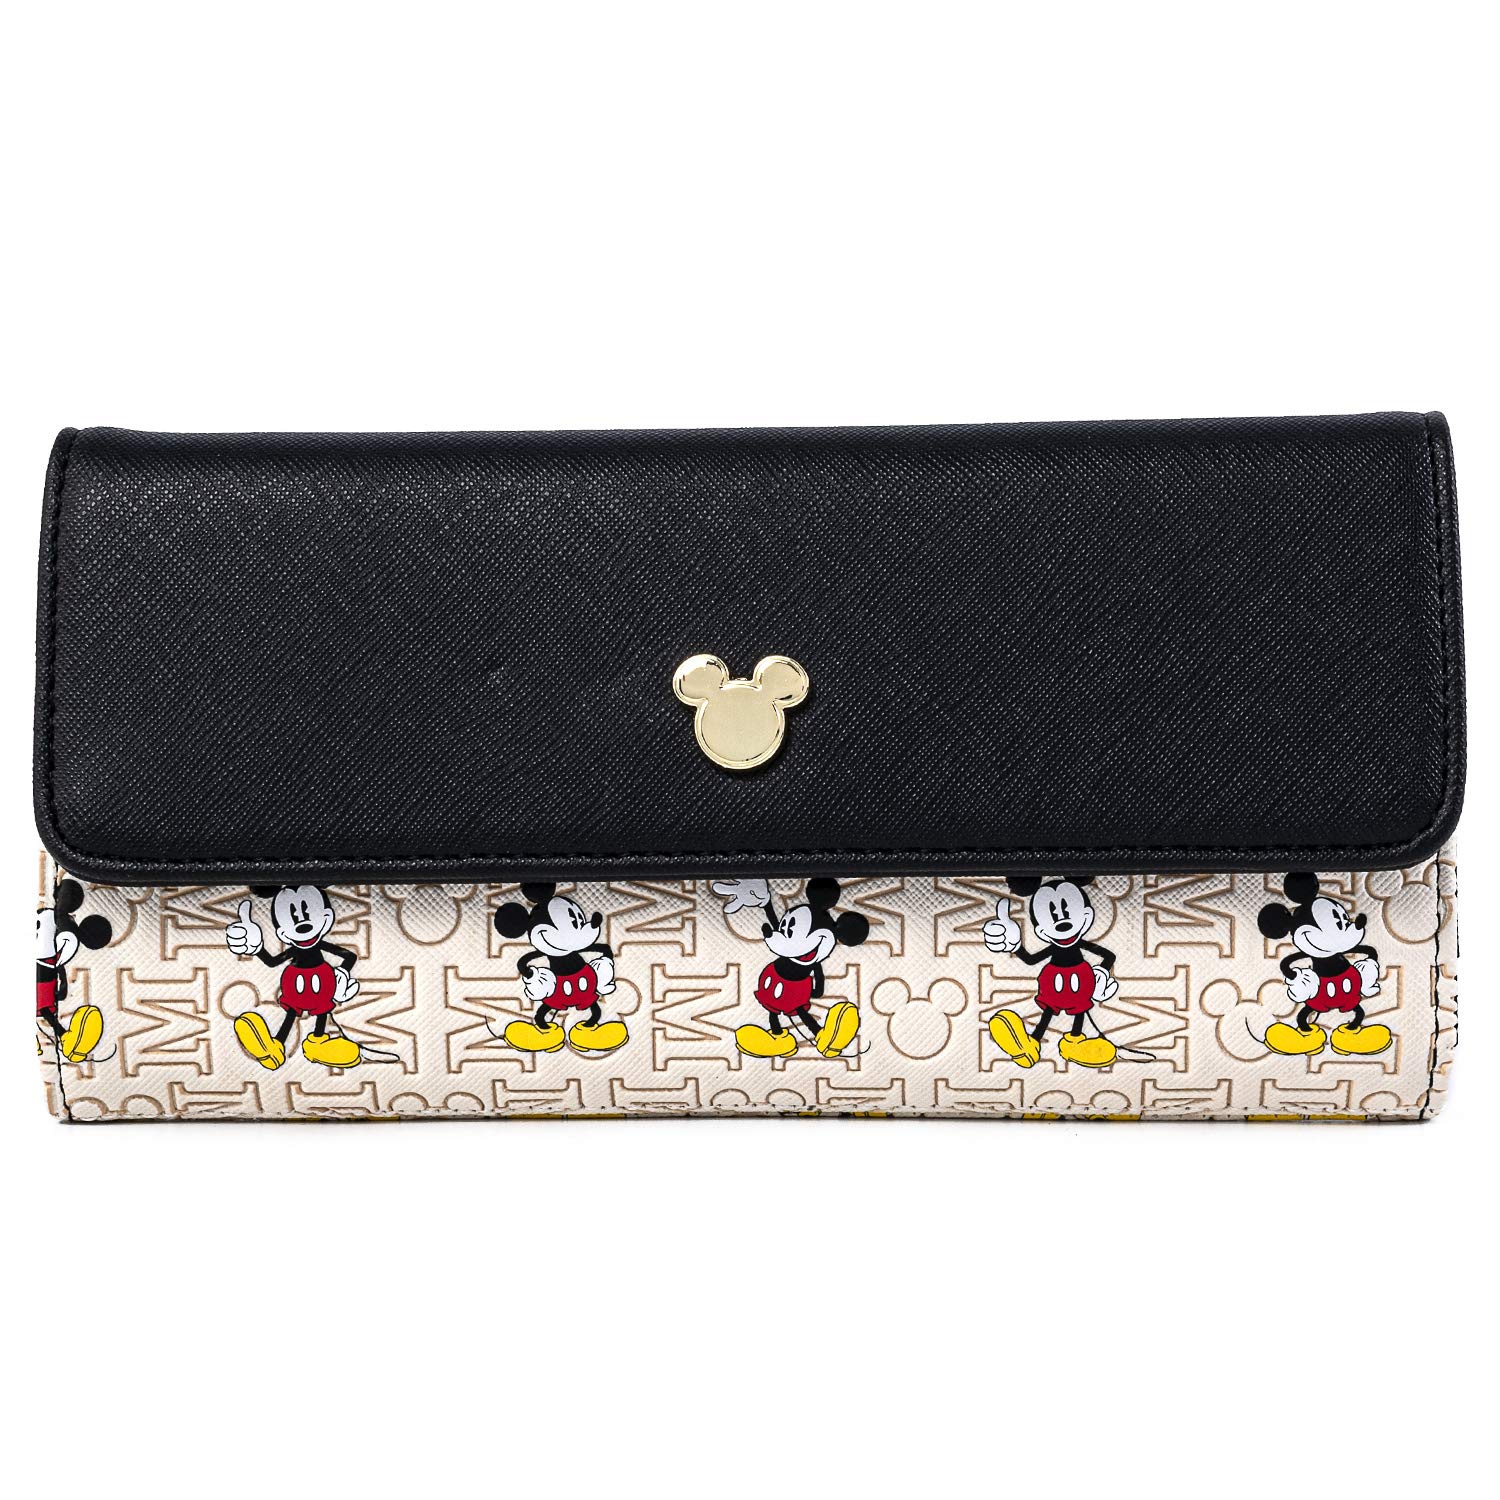 Loungefly Disney Mickey Mouse Hardware Faux Leather Wallet